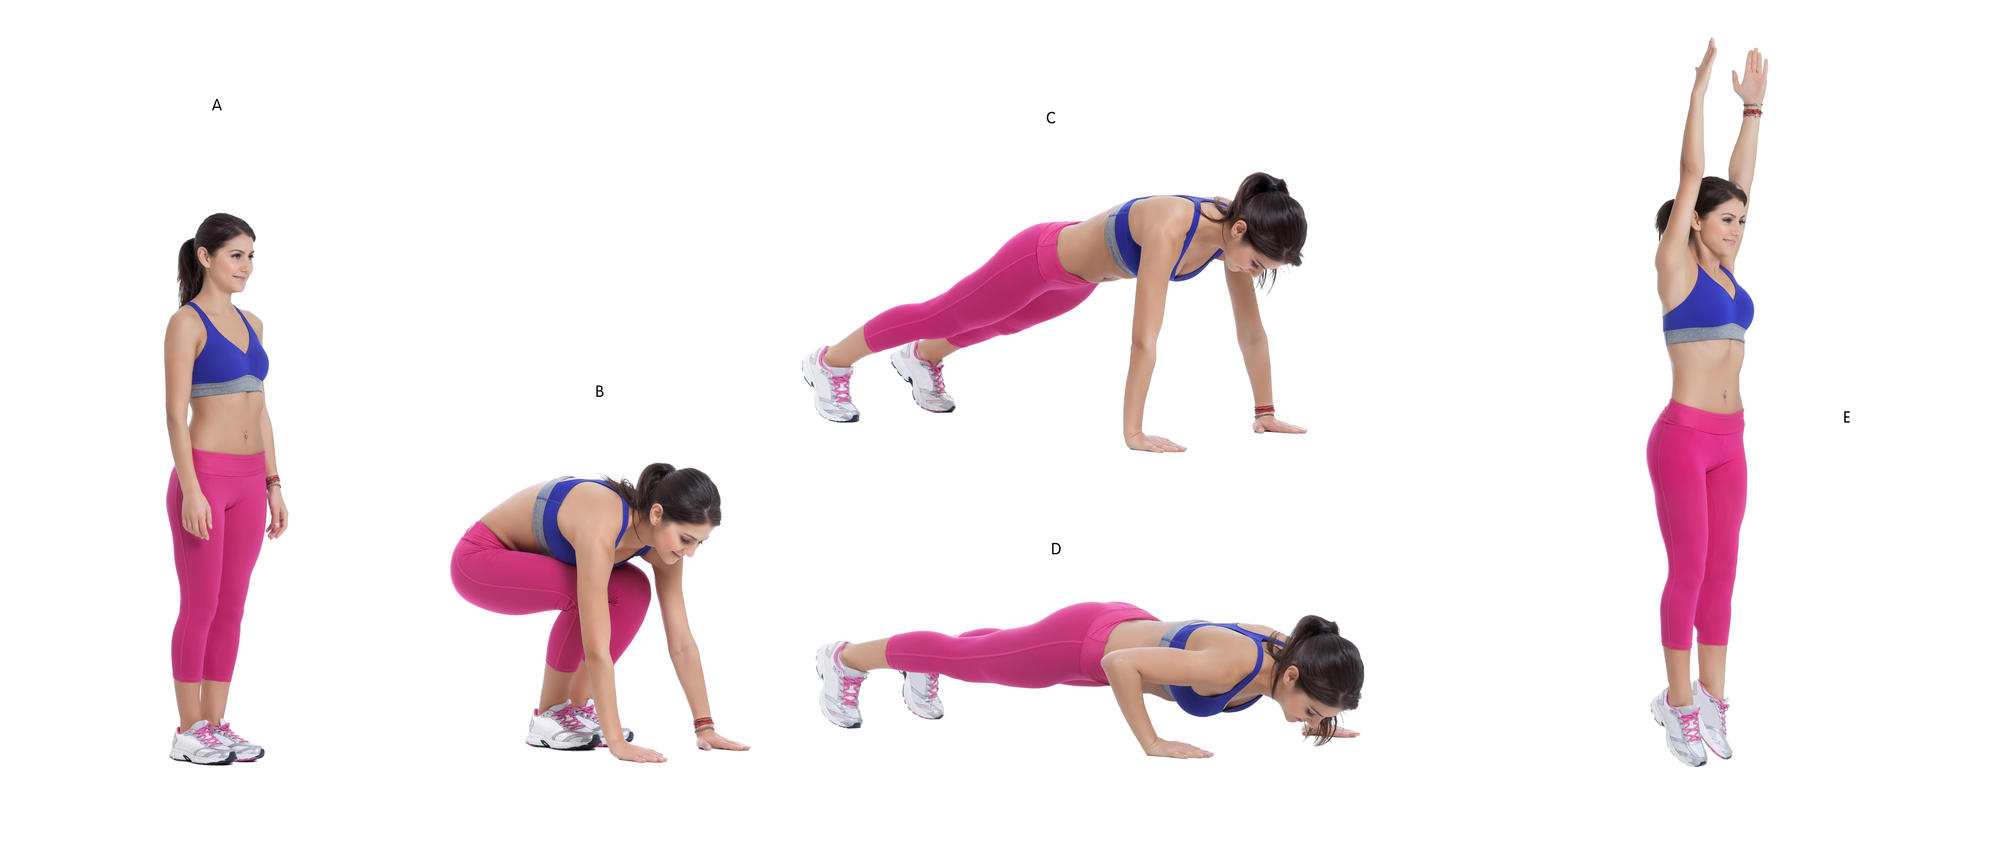 Exercise Workout to Get Slim and Toned Legs